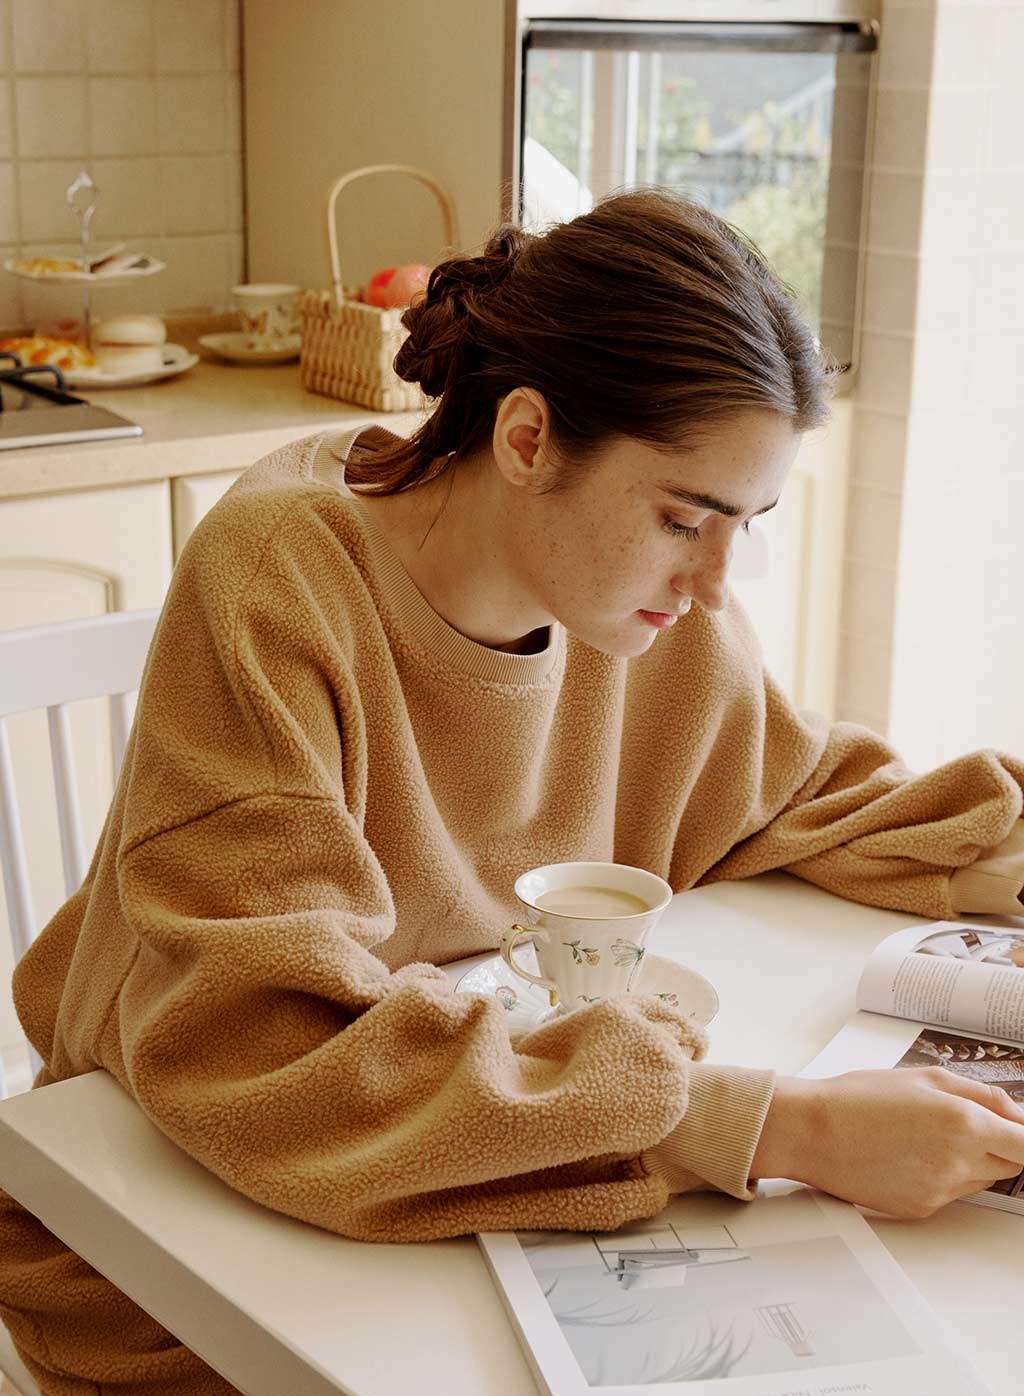 a person wearing the fuzzy sweatshirt while sipping coffee at a dining table